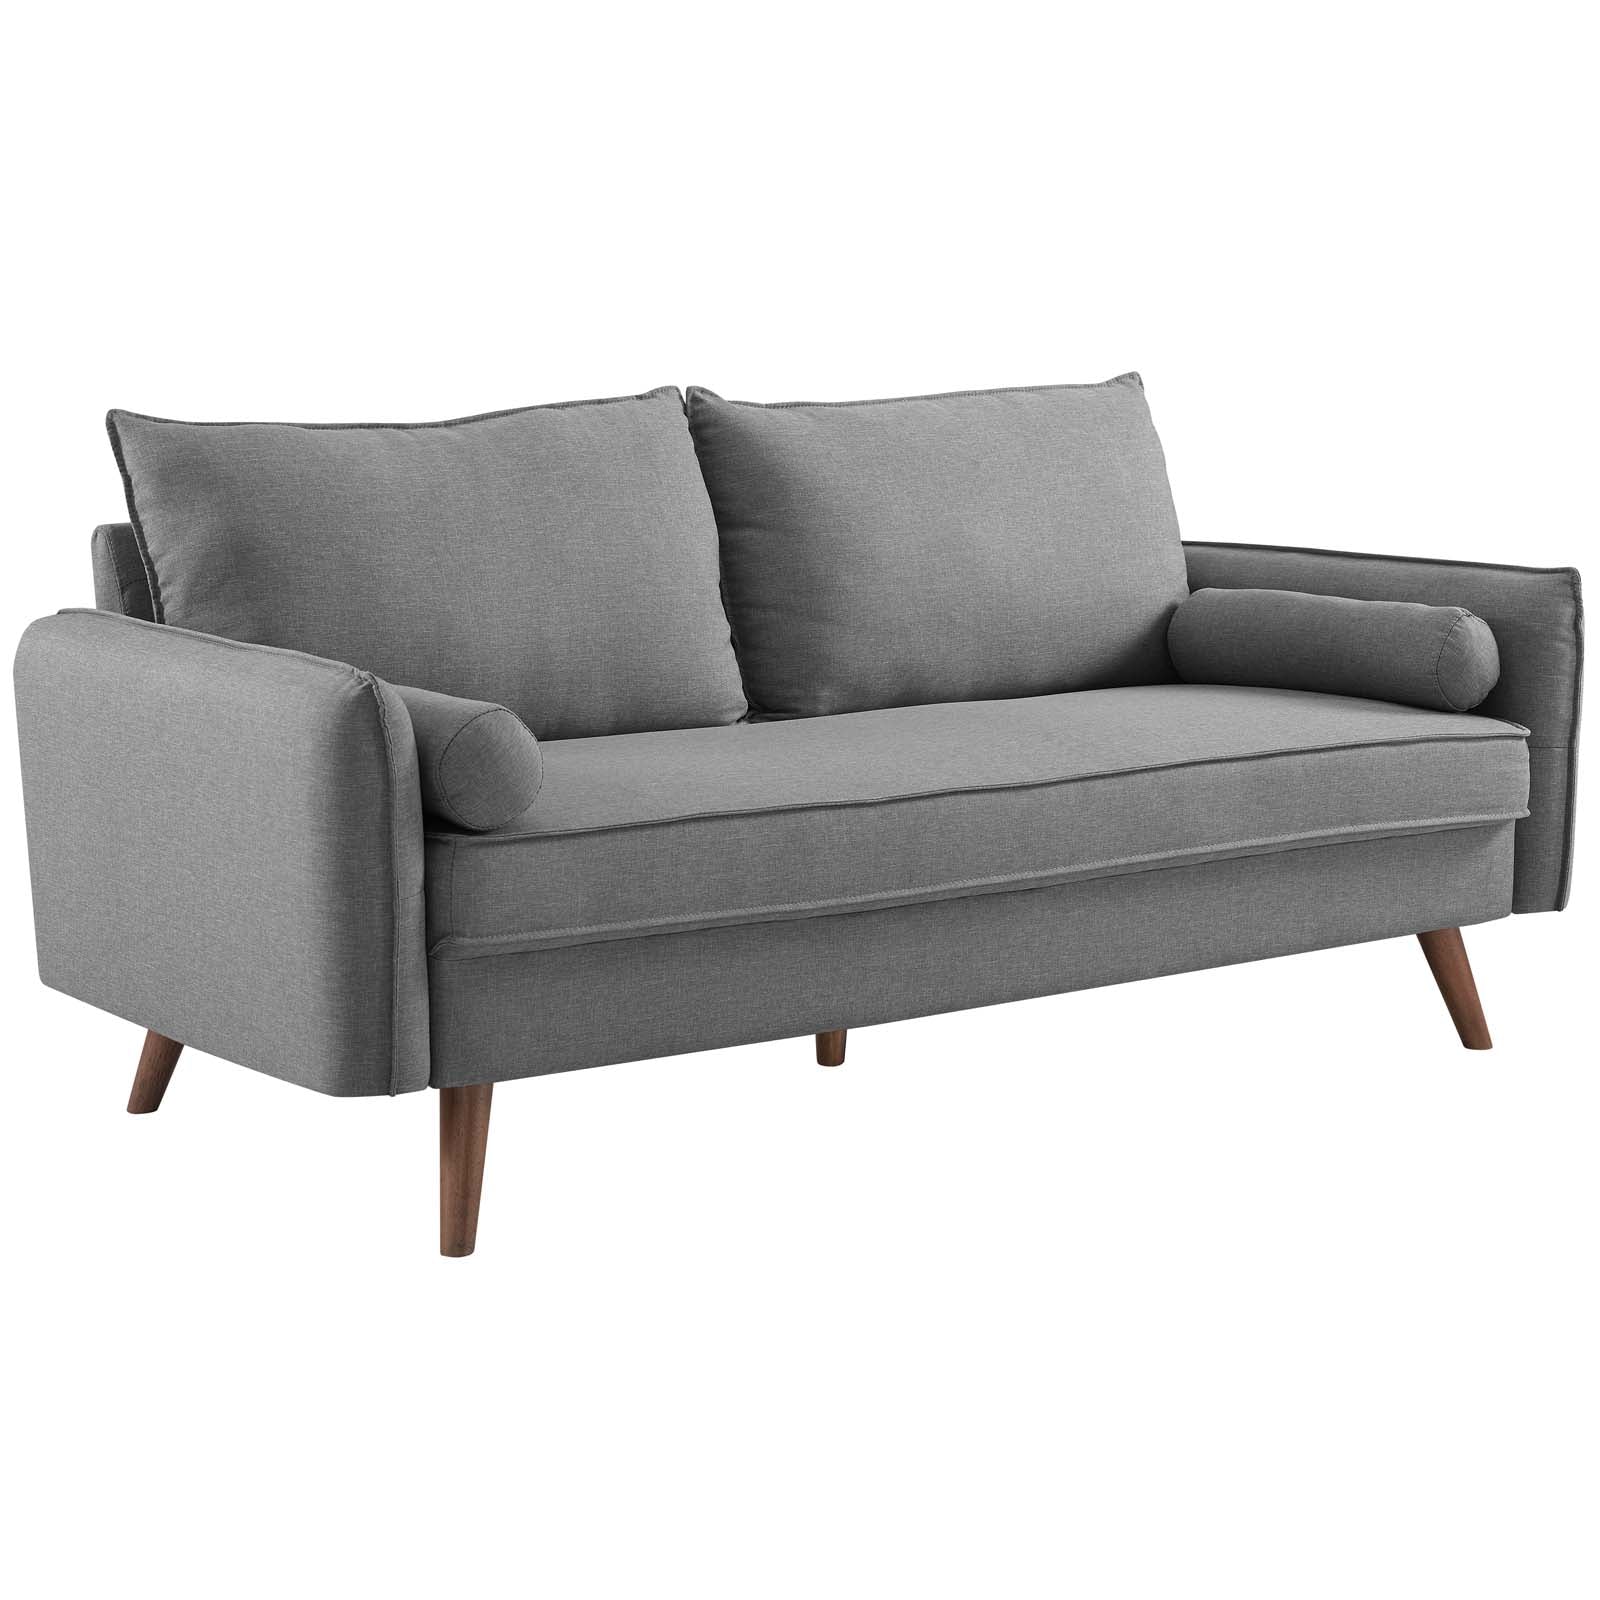 Modway Living Room Sets - Revive Upholstered Fabric Sofa and Loveseat Set Light gray